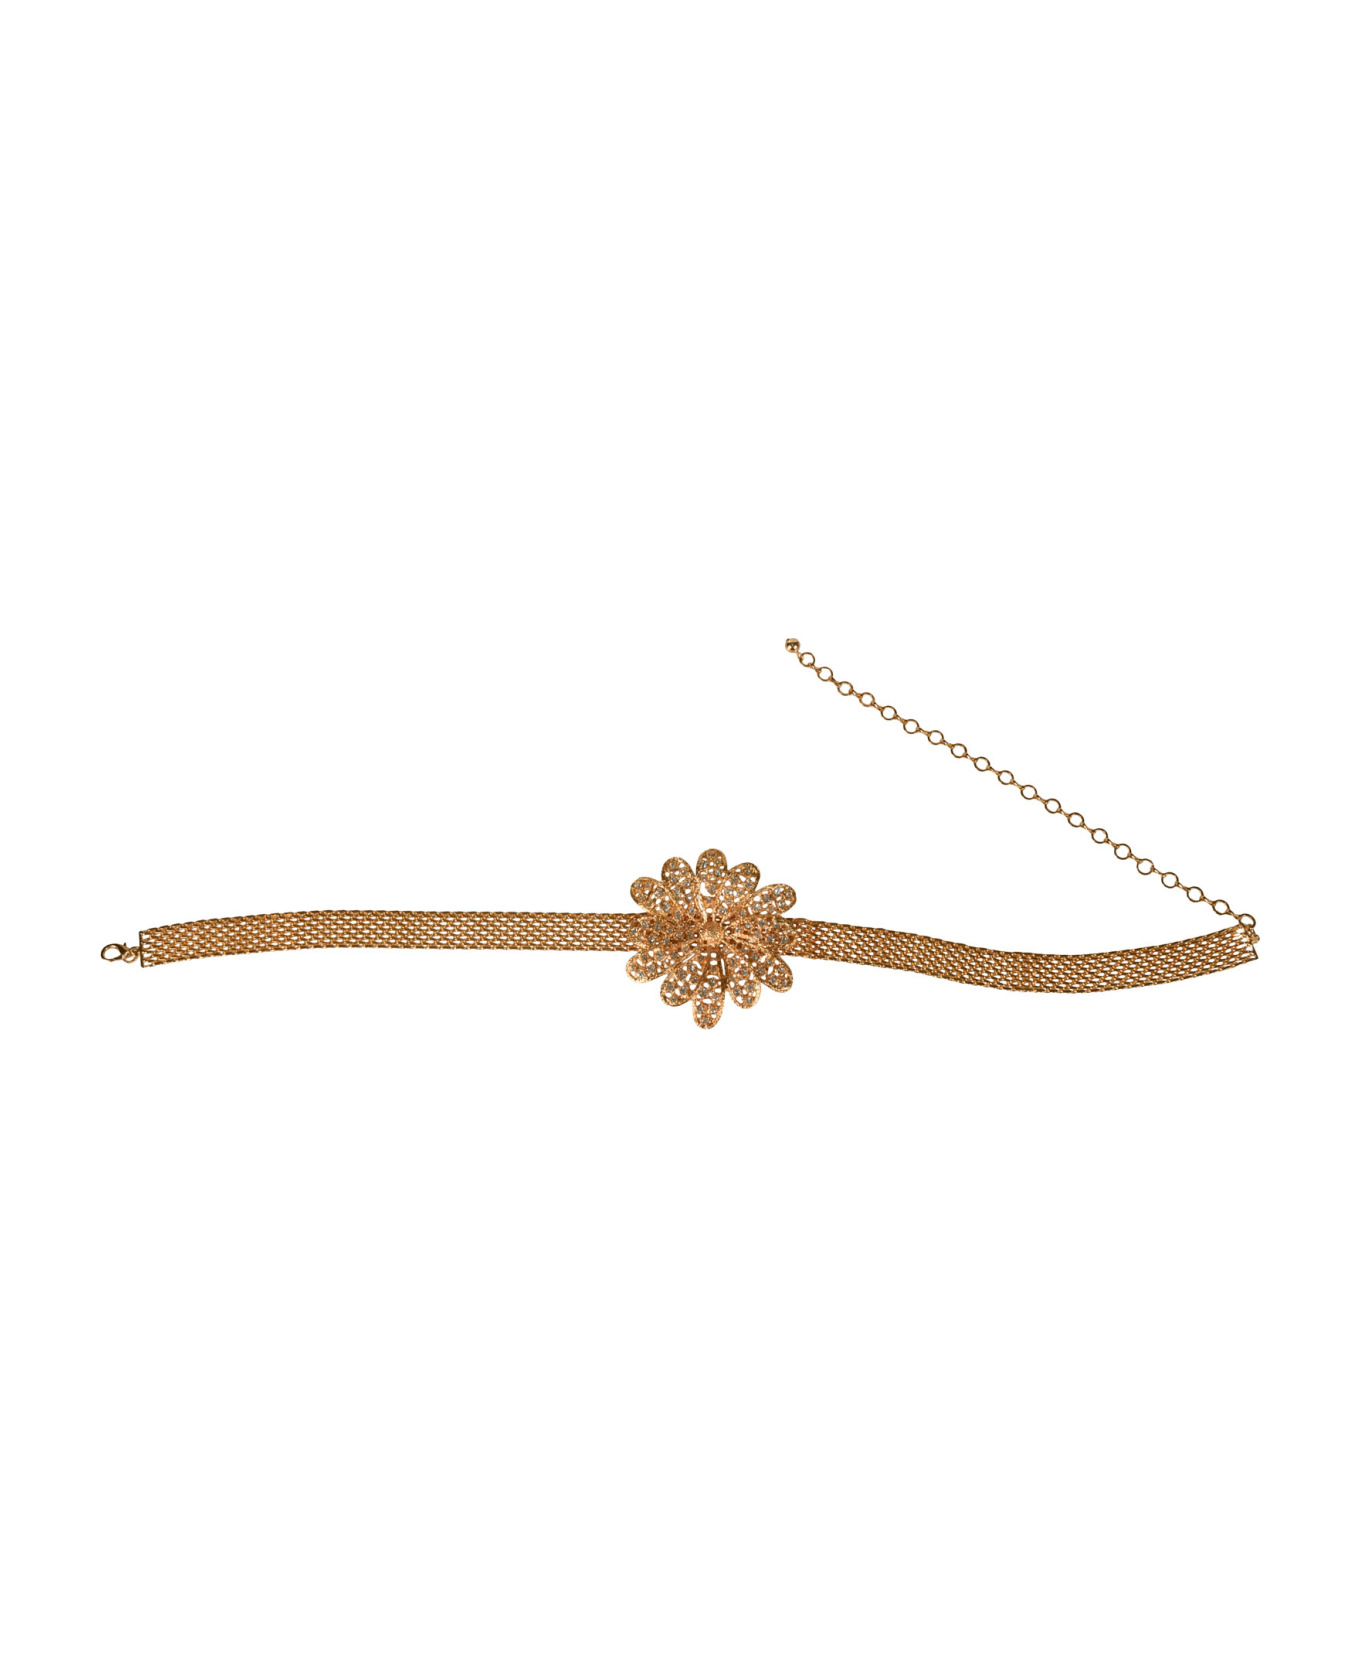 Alessandra Rich Floral Detail Chain-link Belt - Cry/Gold